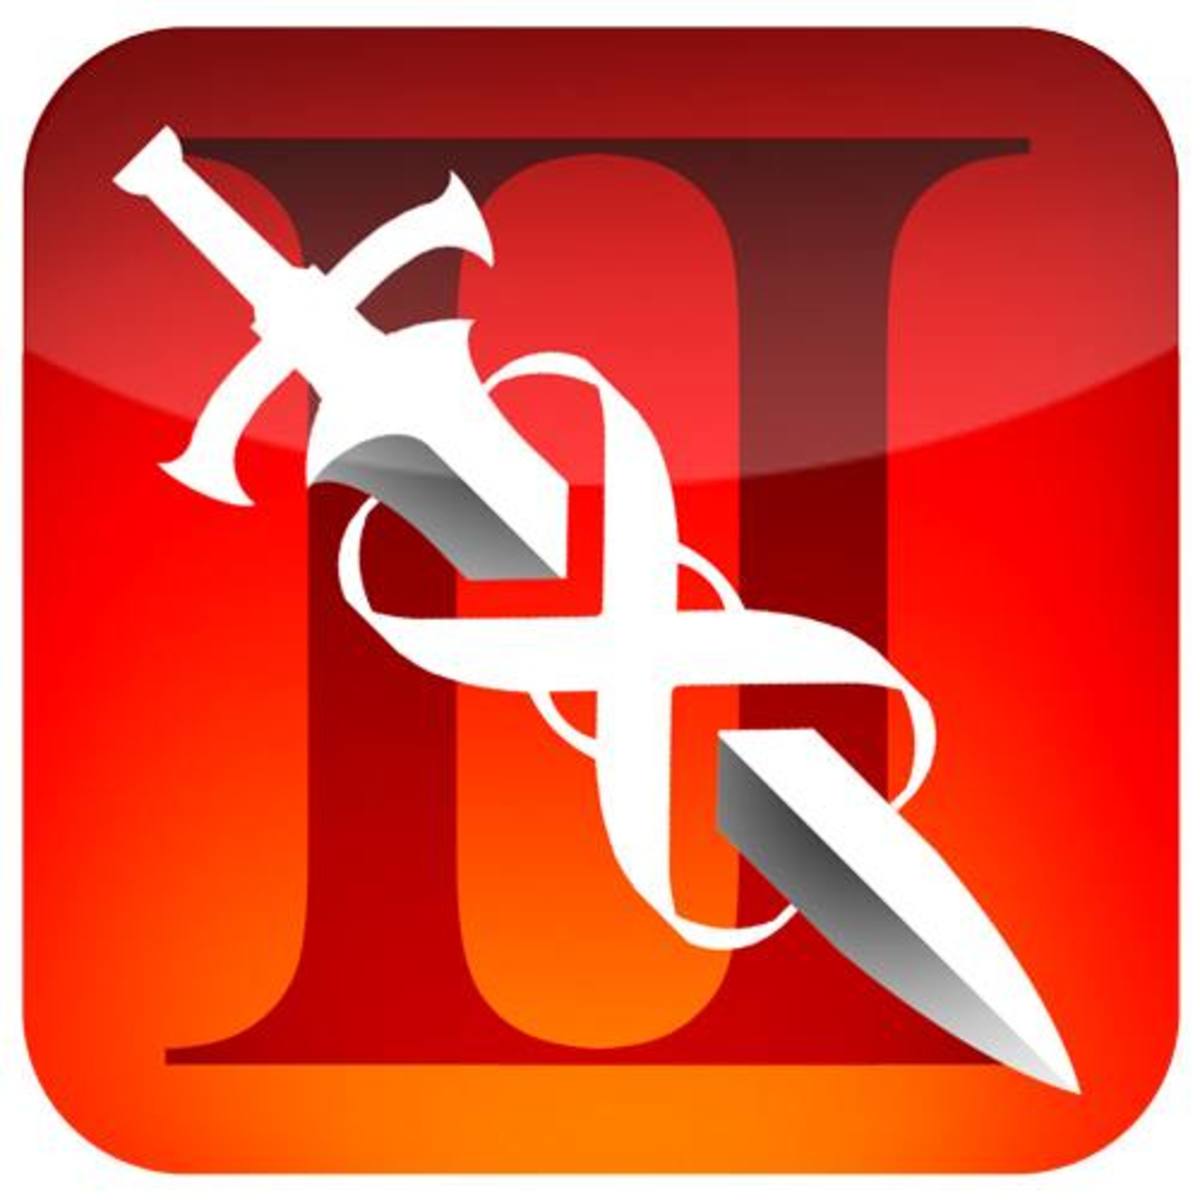 infinity-blade-2-guide-iphone-ipod-ipad-hints-tips-and-strategies